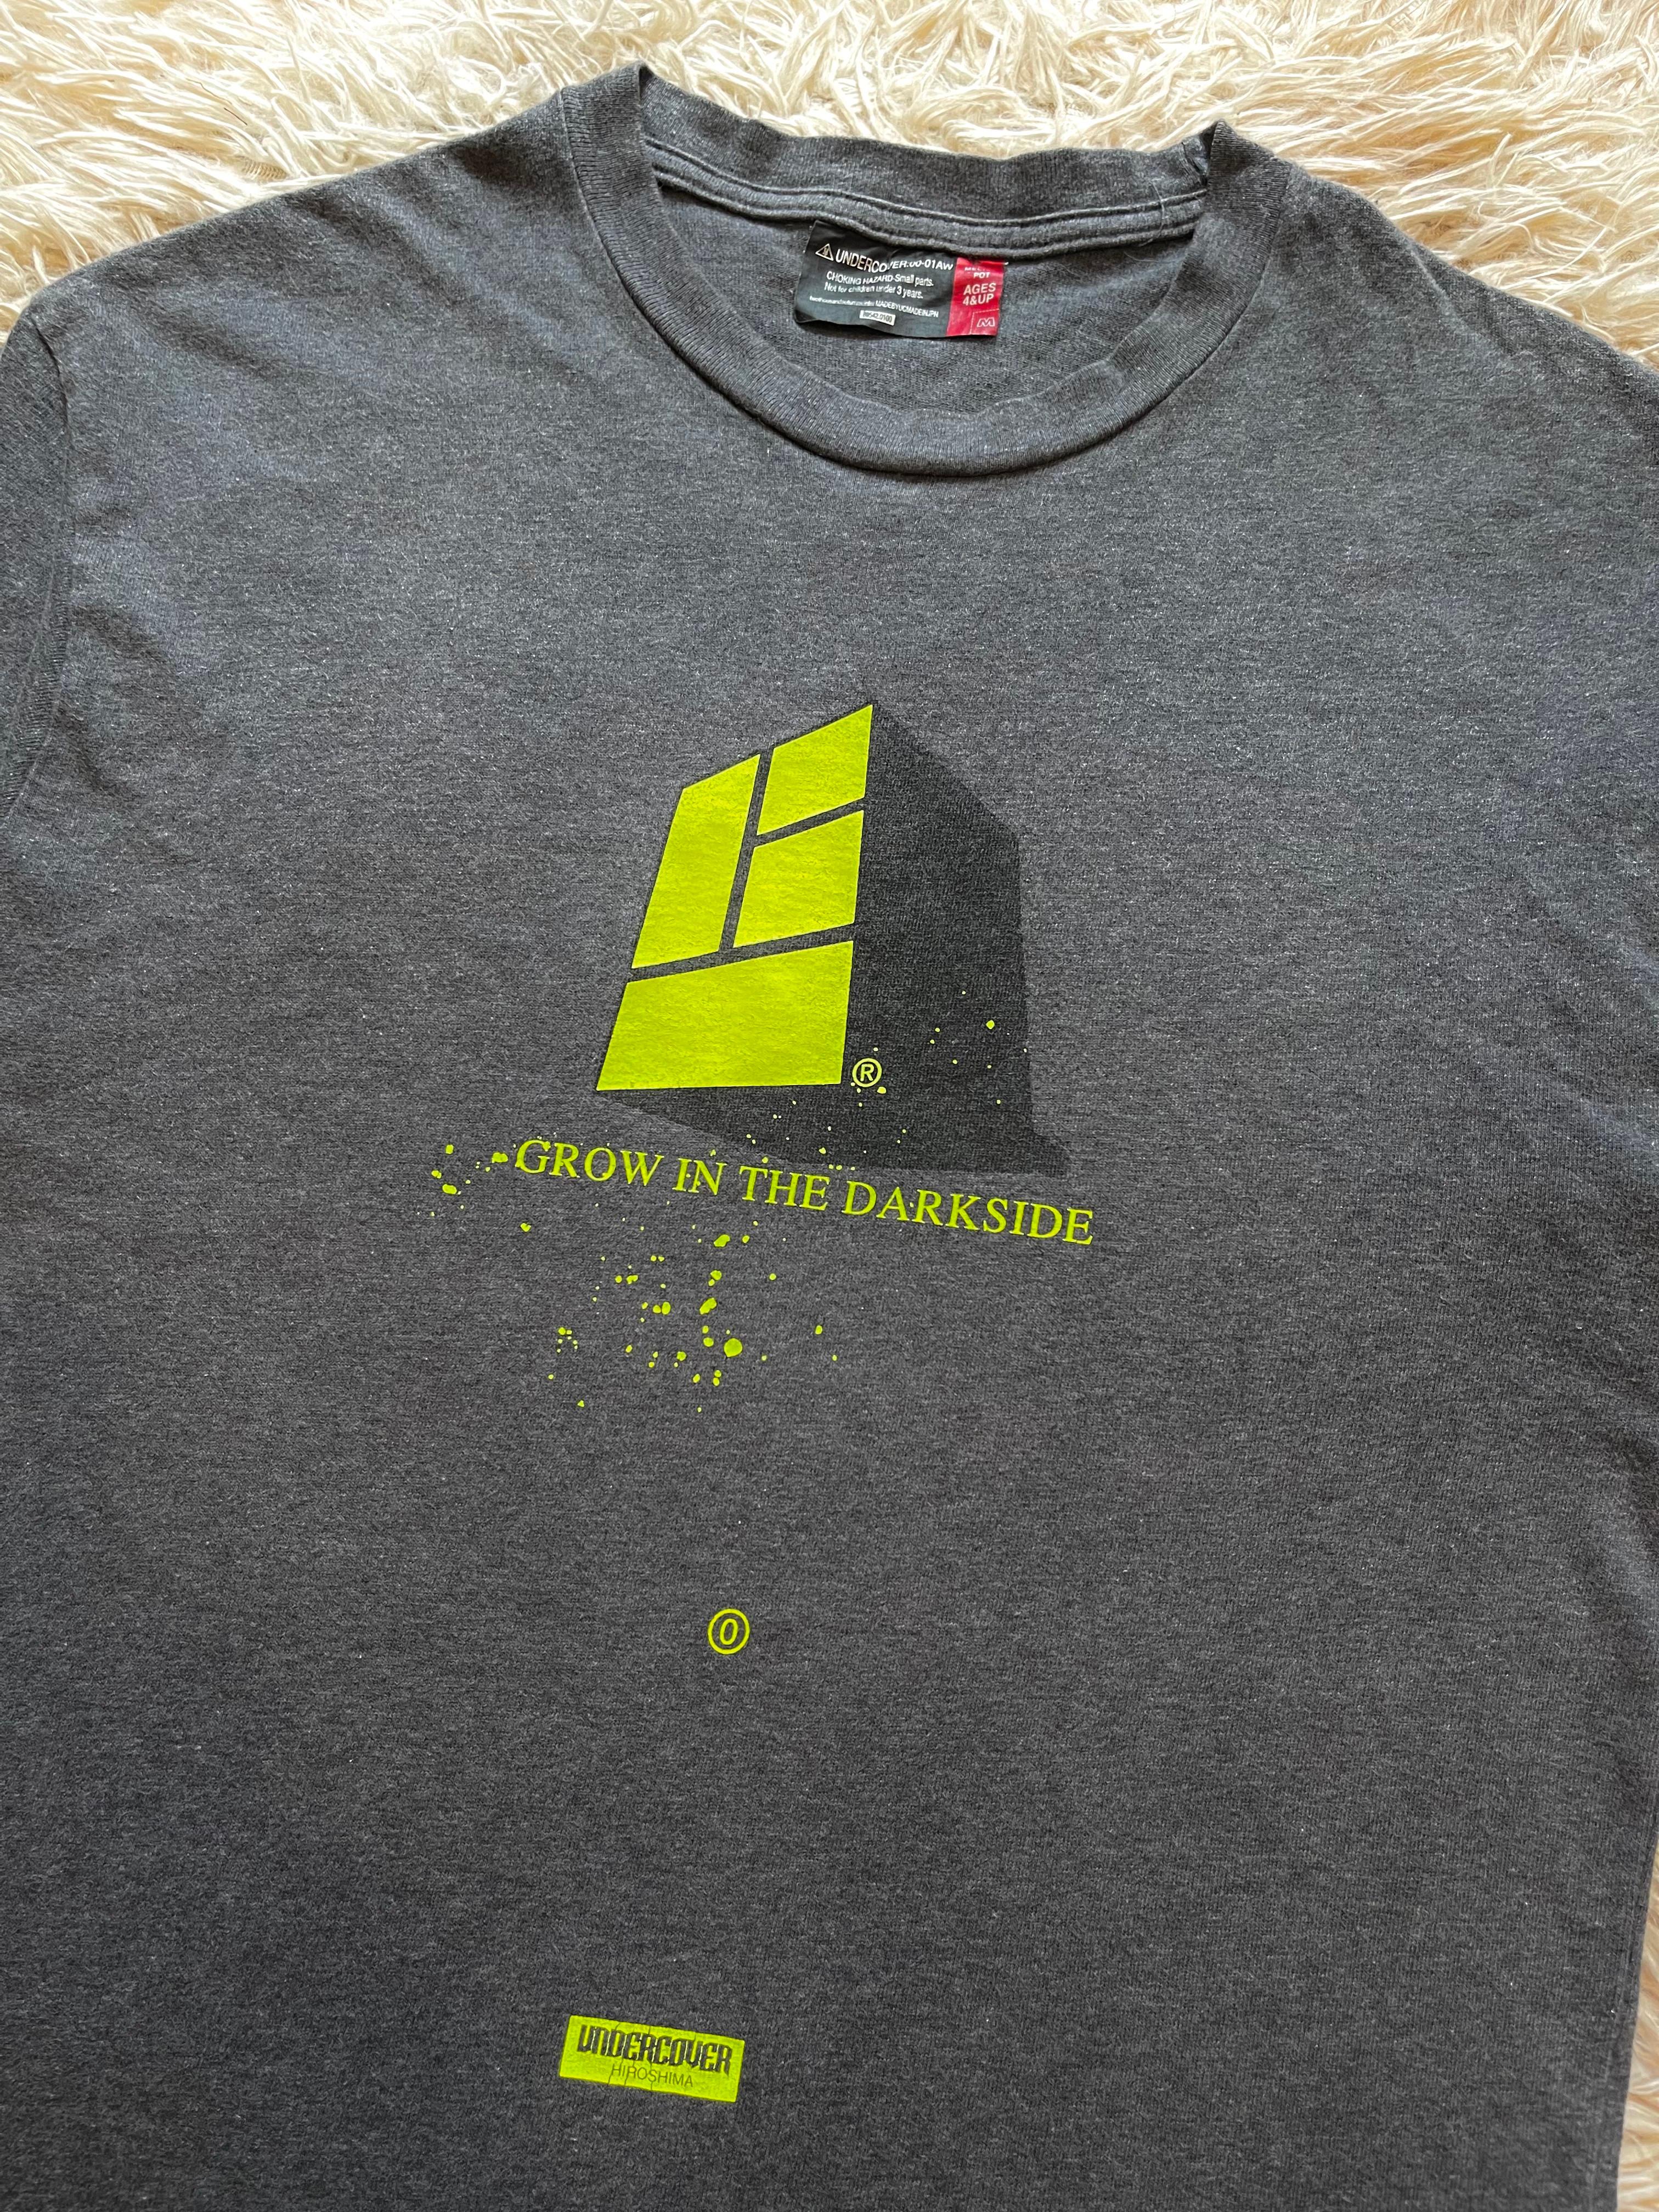 Undercover 2000 Melting Pot Cube T-Shirt In Good Condition For Sale In Seattle, WA